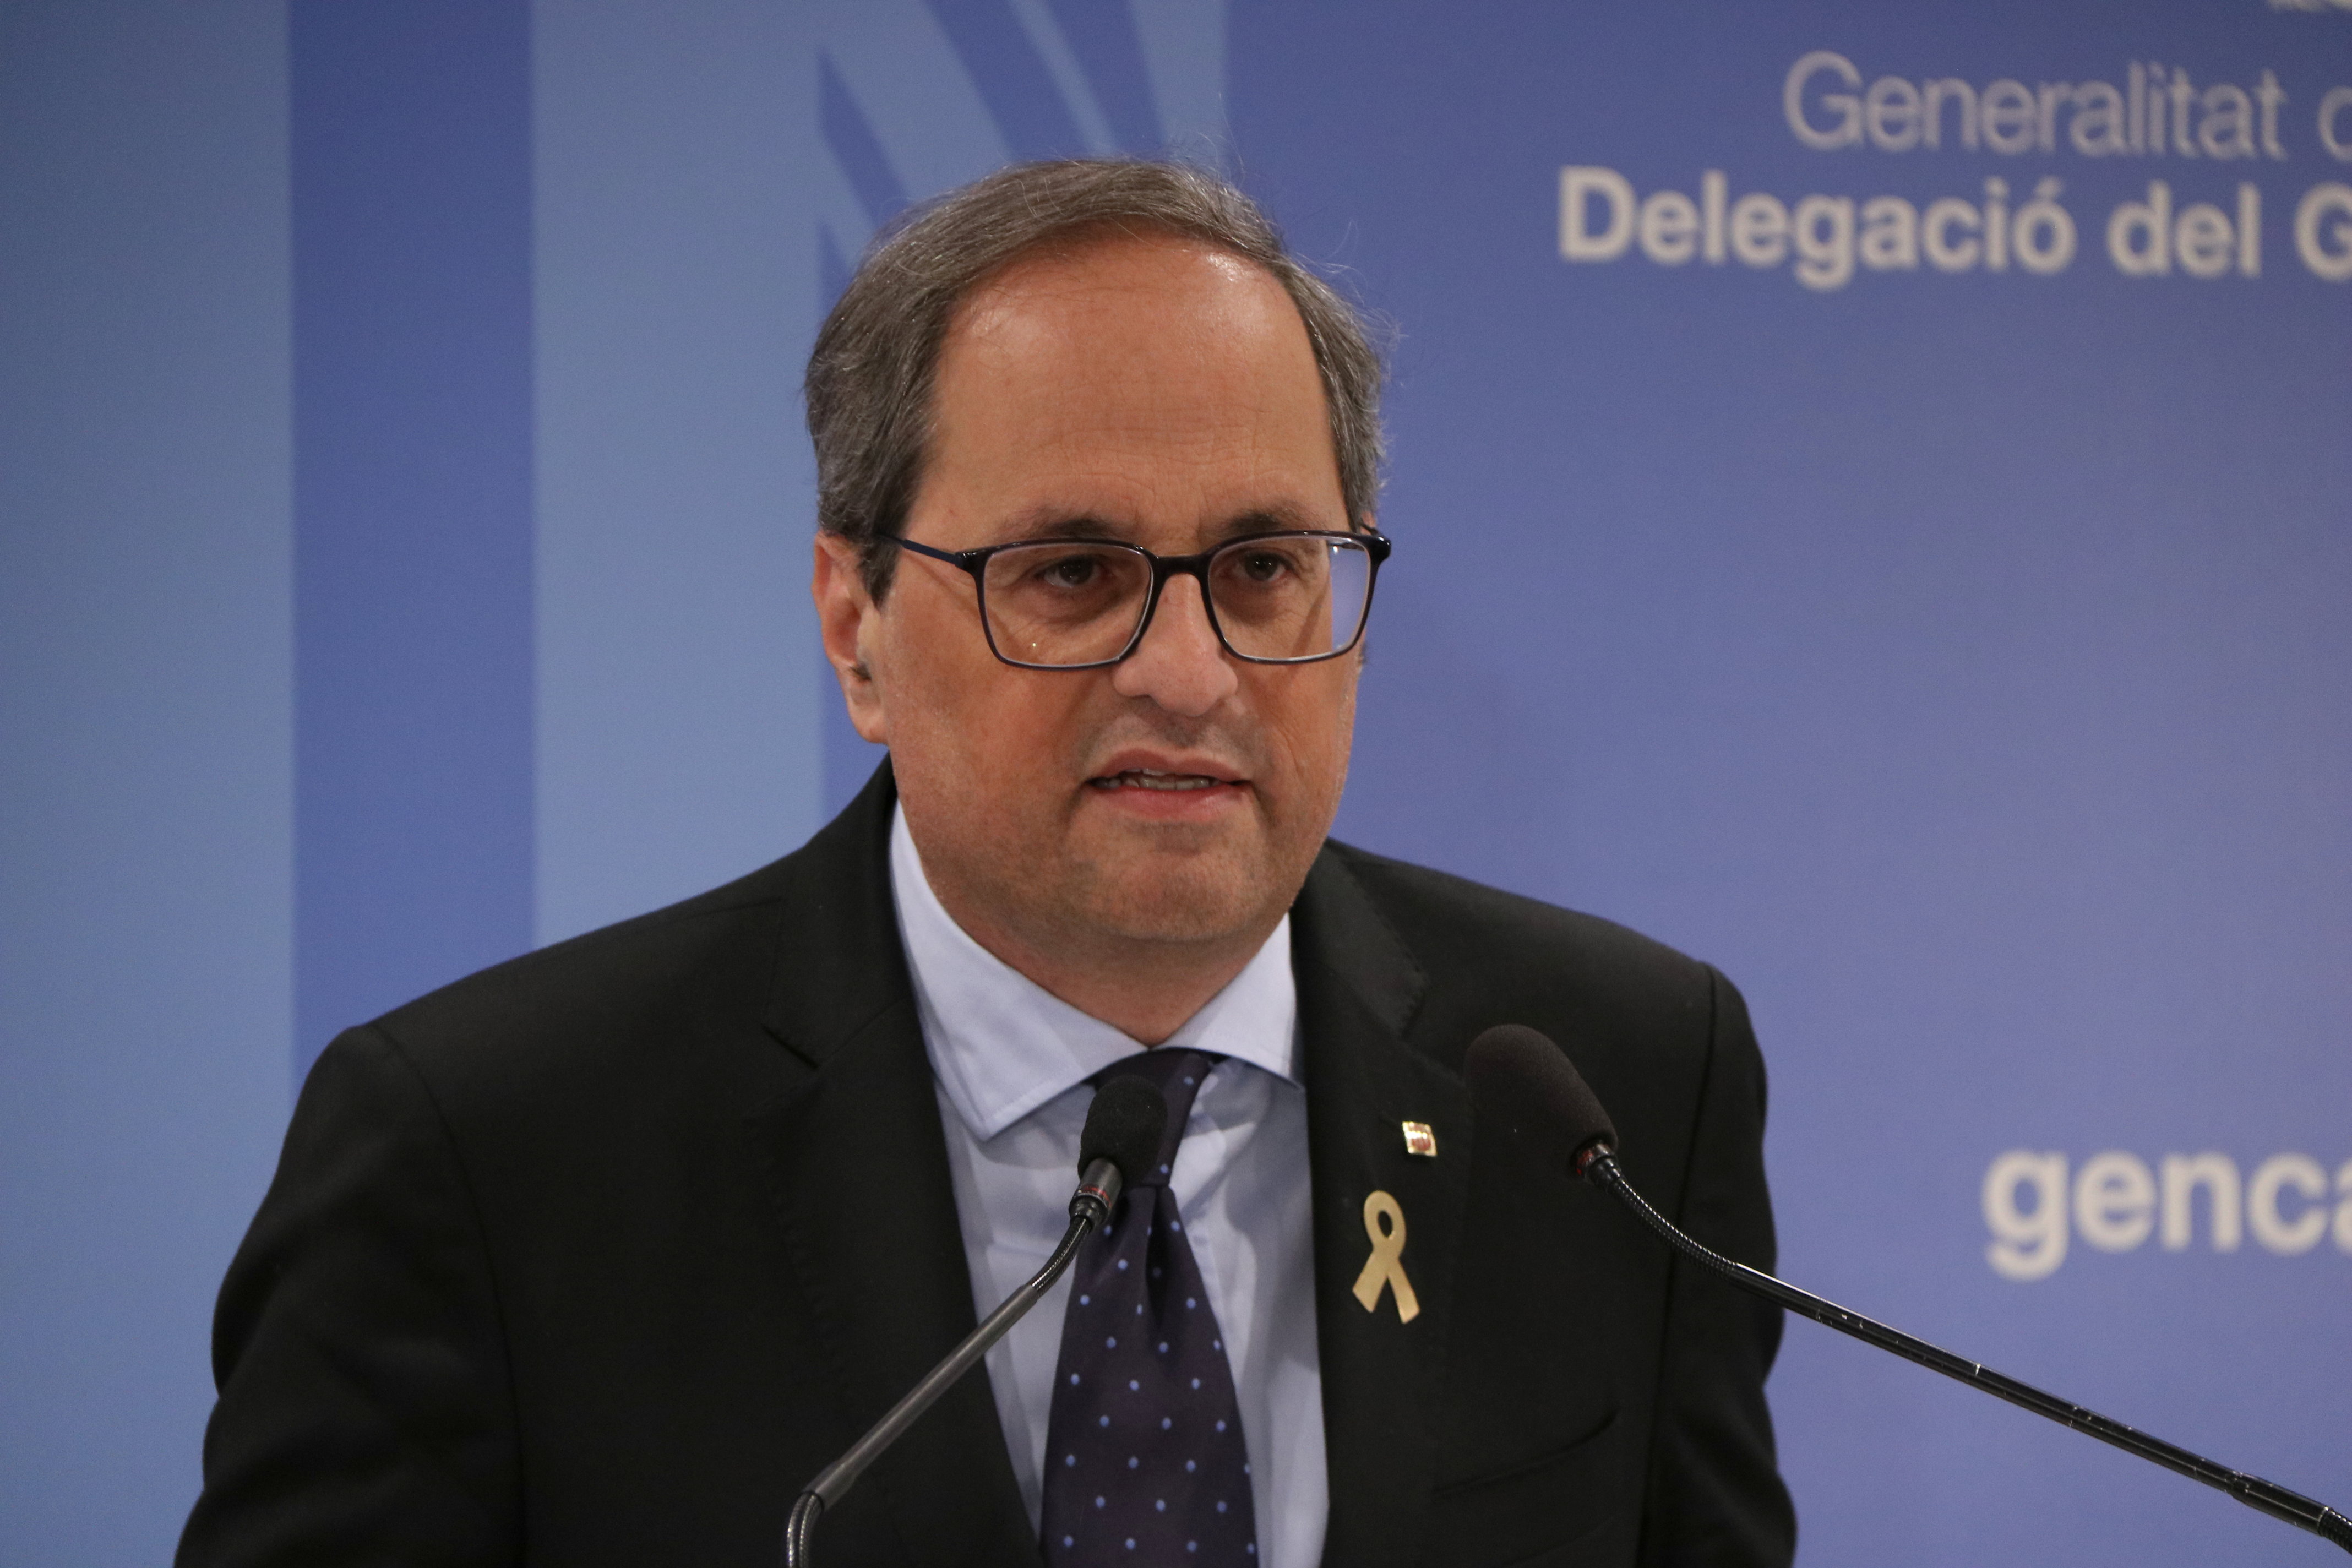 Catalan president Quim Torra speaks to the press after the independence trial ends on June 12 (Andrea Zamorano/ACN)